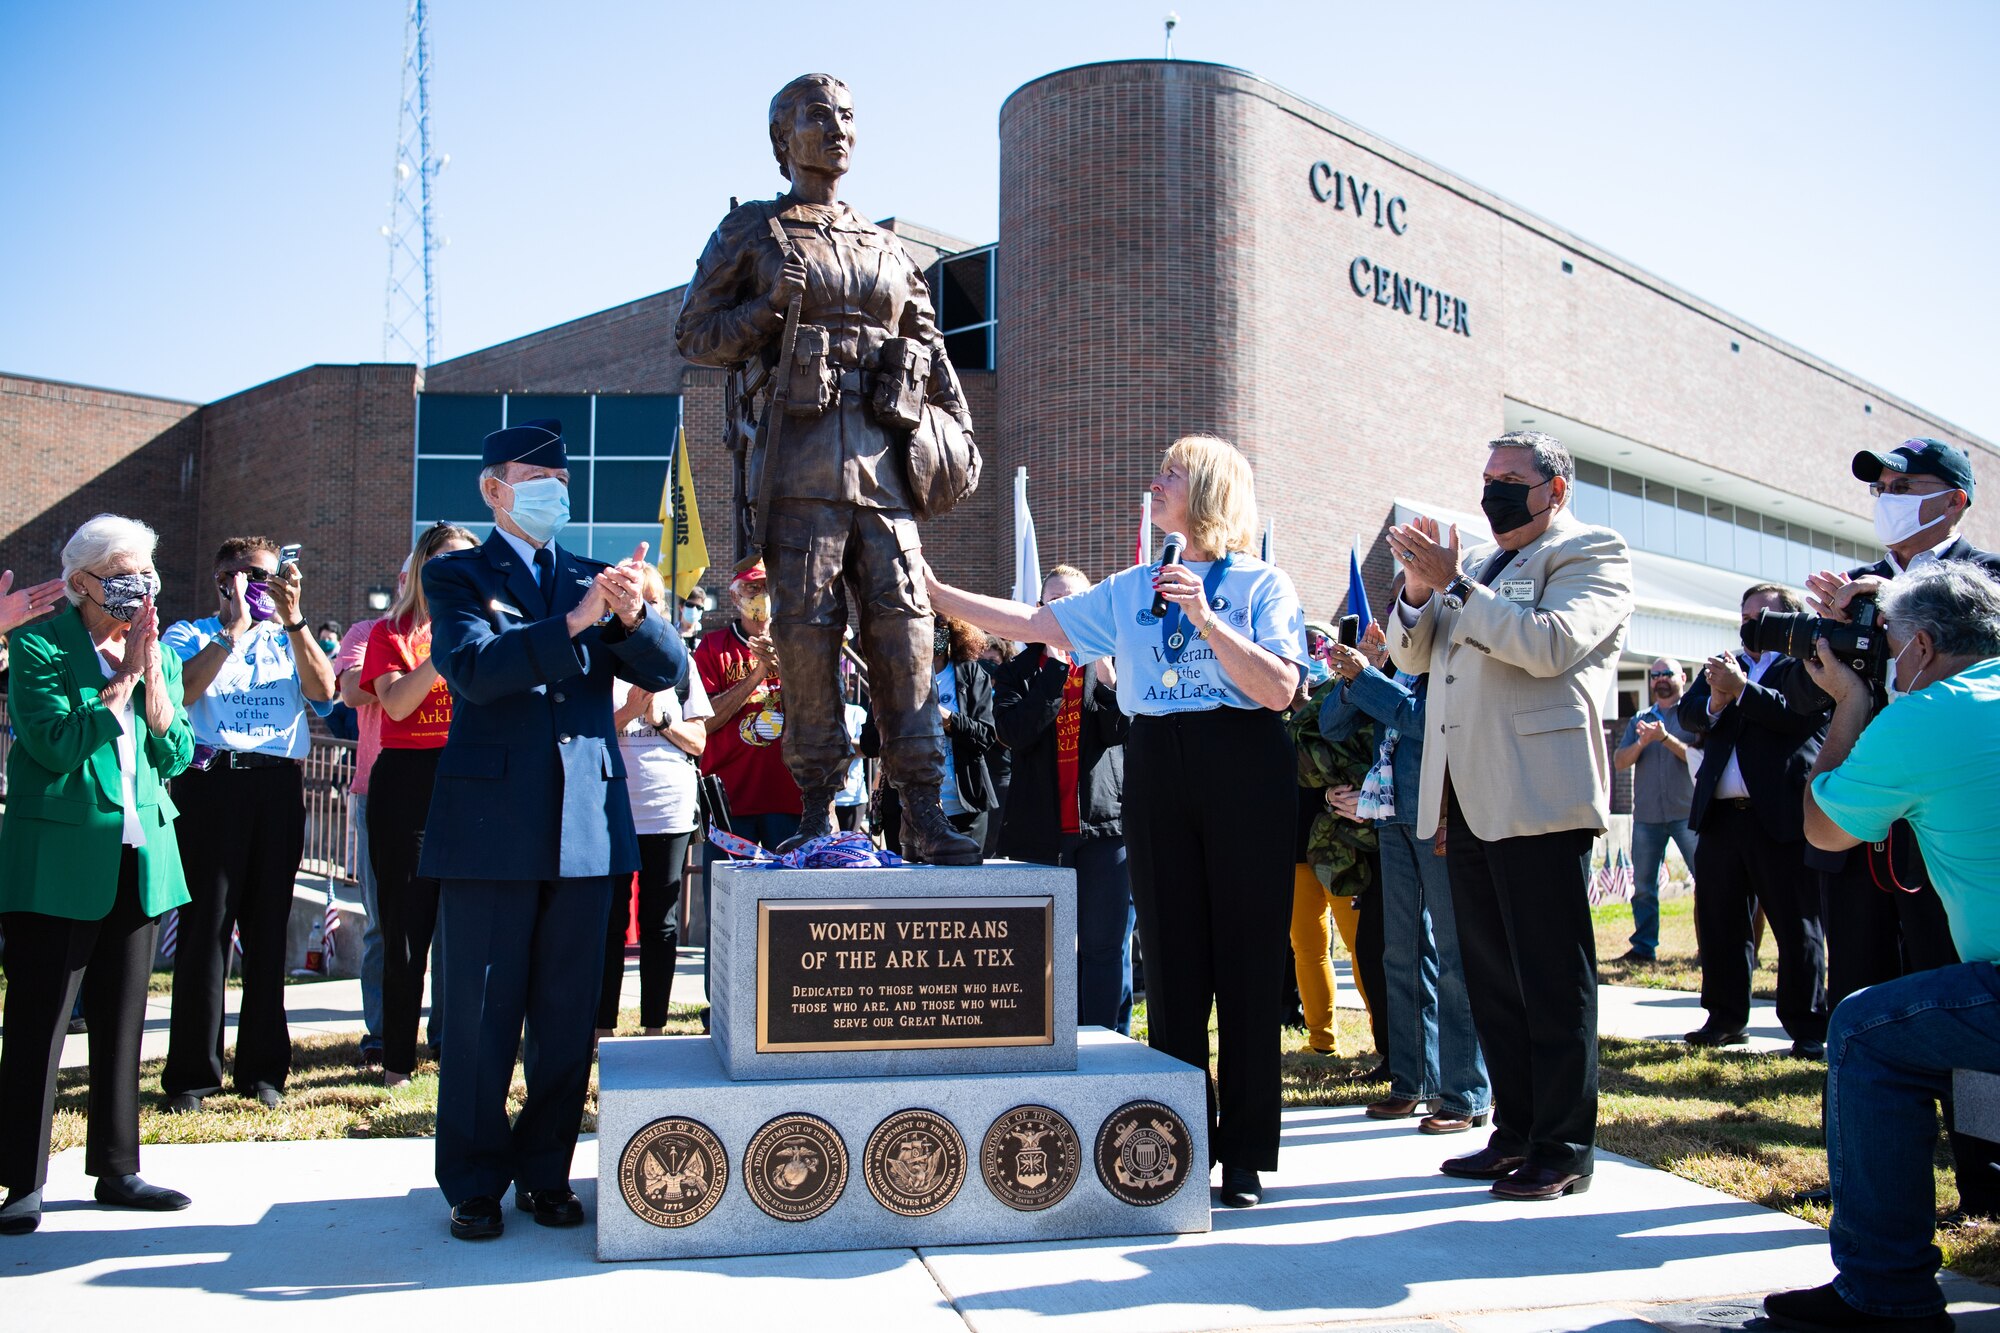 Lorenz Walker, Bossier City mayor and retired U.S. Air Force colonel; Sandy Franks, Women Veterans of the Ark-La-Tex president; and Joey Strickland, Louisiana Department of Veterans Affairs secretary, unveil the Women Veterans of the Ark-La-Tex statue at the Bossier City Civic Center in Bossier City, La., Nov. 11, 2020. The Women Veterans of the Ark-La-Tex statue is dedicated to the women, past and present, who have served in the U.S. military. (U.S. Air Force photo by Airman 1st Class Jacob B. Wrightsman)